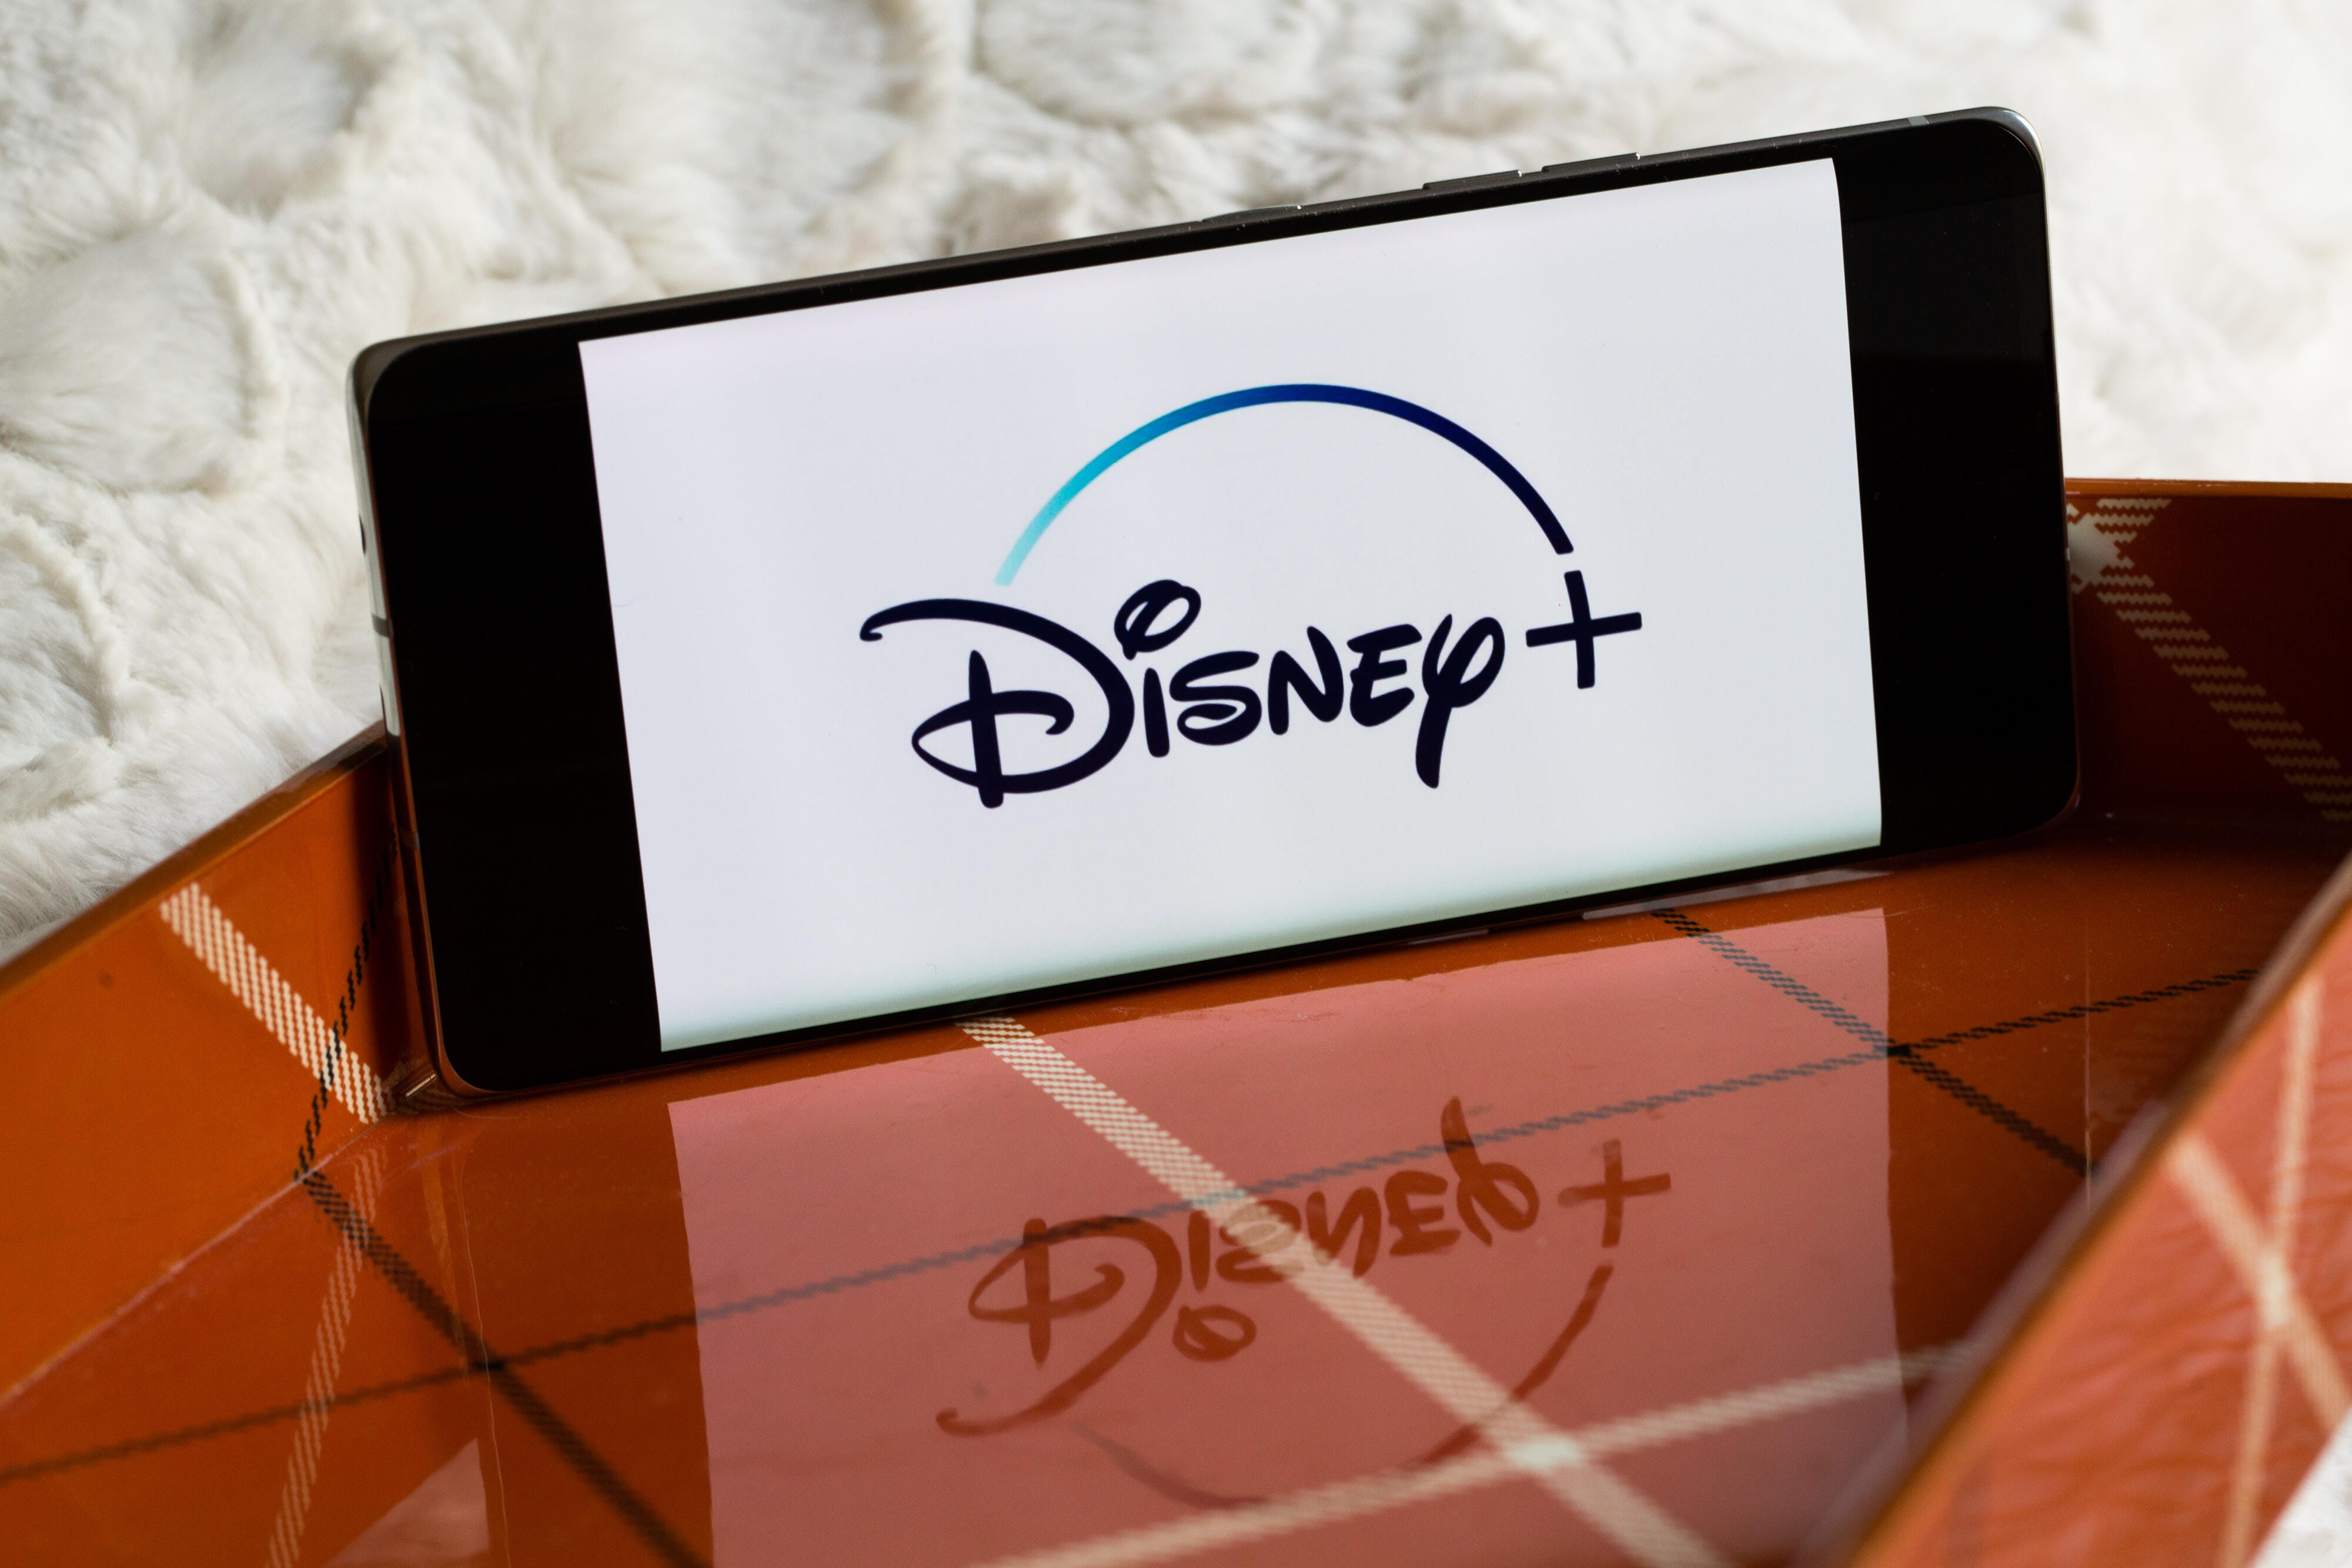 Disney Plus GroupWatch lets you enjoy your favorite movies remotely with friends. Here’s how